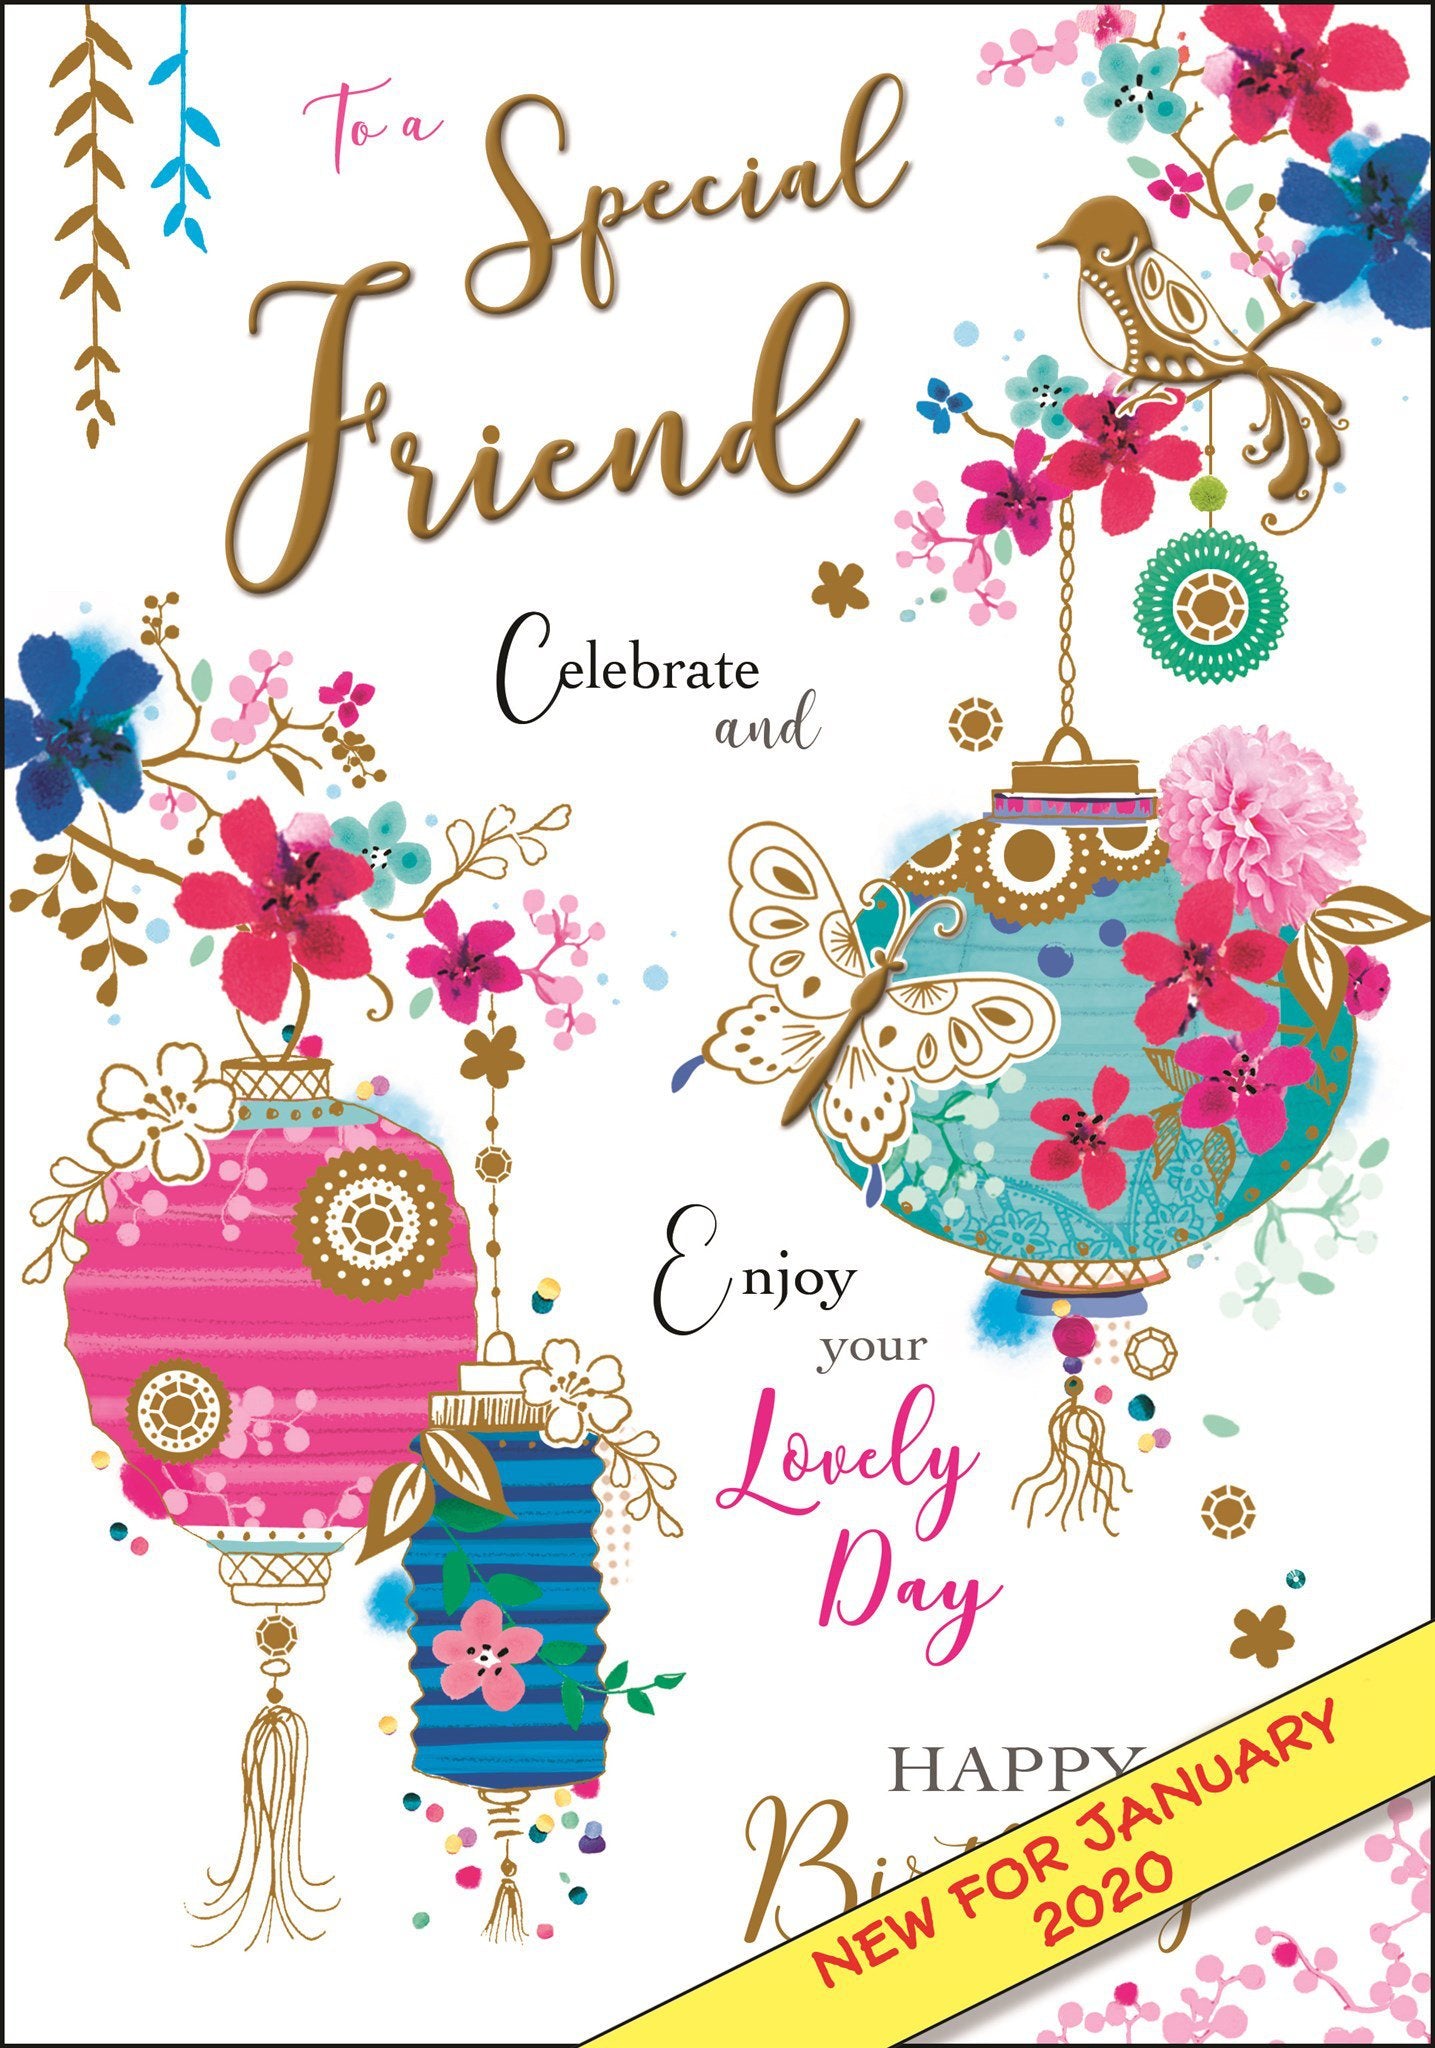 Front of Special Friend Birthday Lanterns Greetings Card